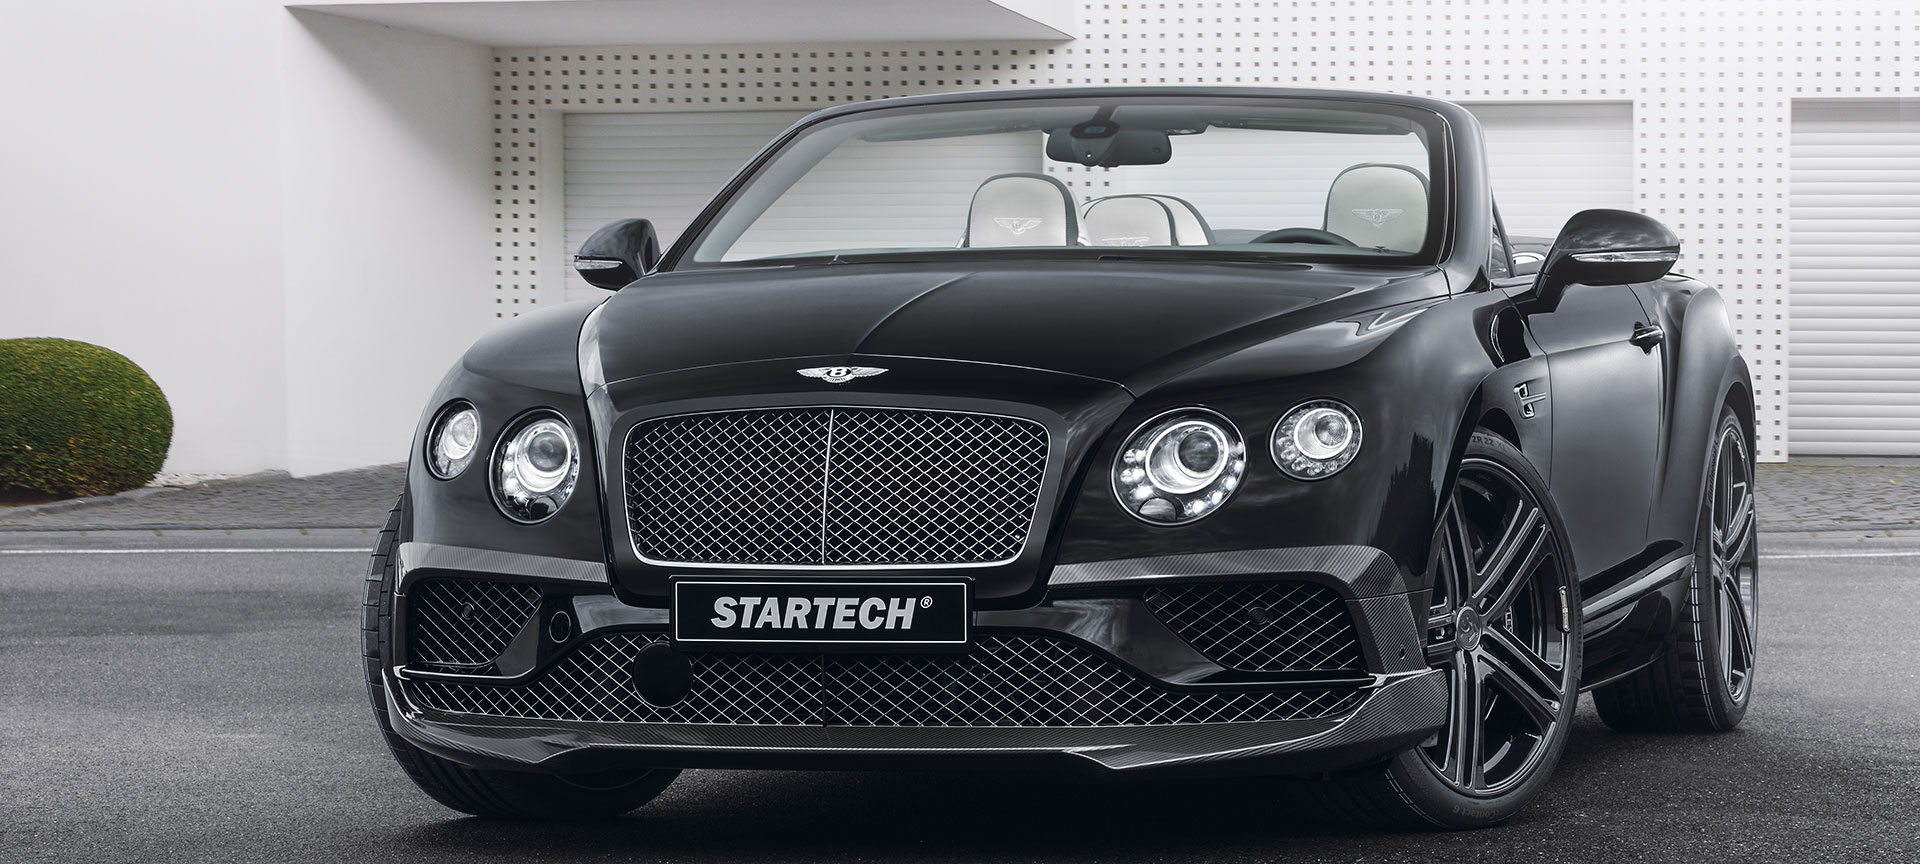 STARTECH Bentley Continental Tuning Front